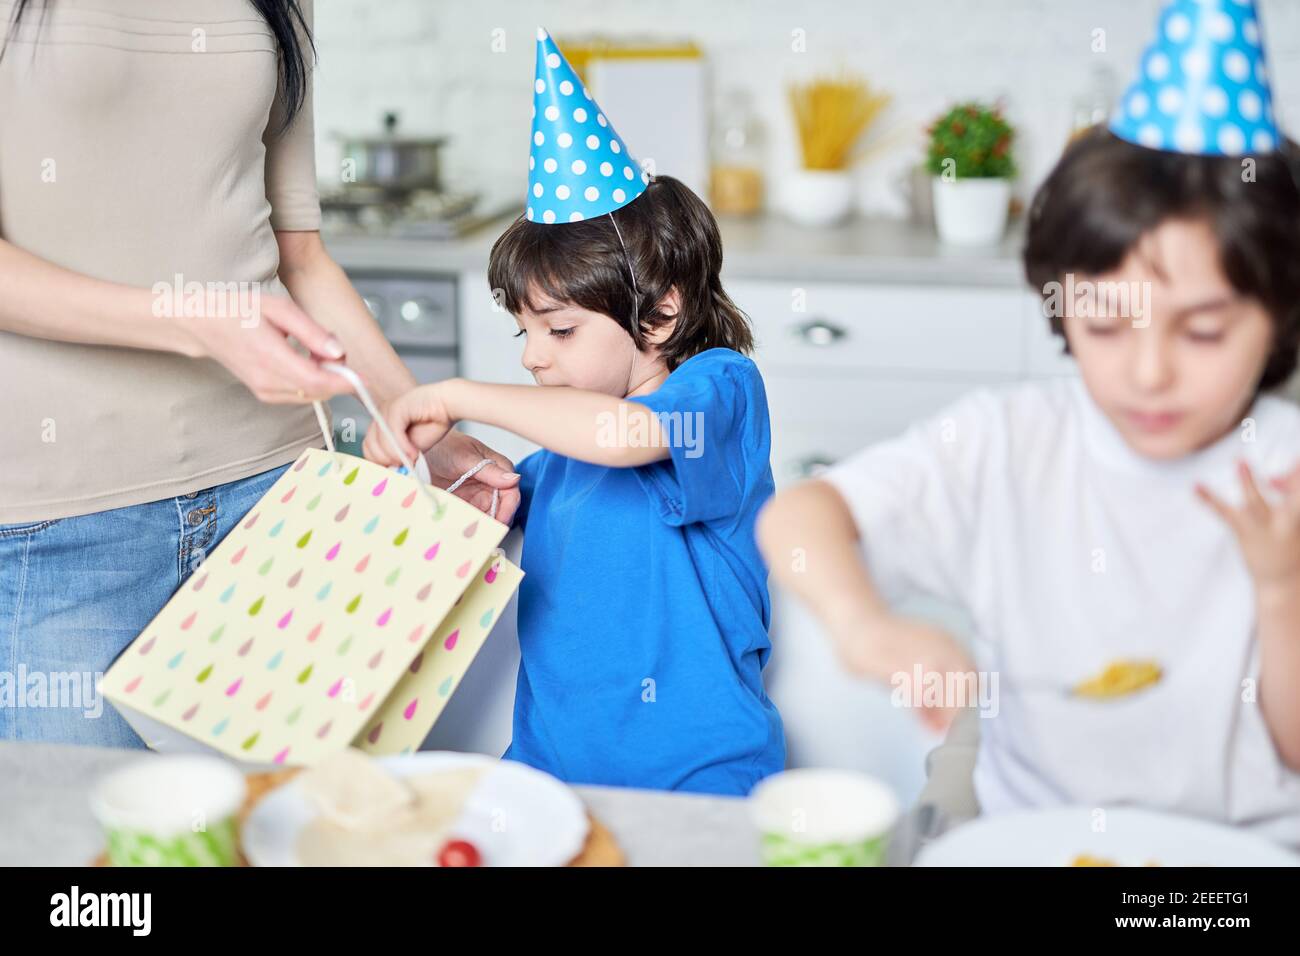 Cute little boy in birthday cap receiving presents fron his parents. Latin family celebrating birthday together at home. Childhood, celebration concept. Selective focus Stock Photo